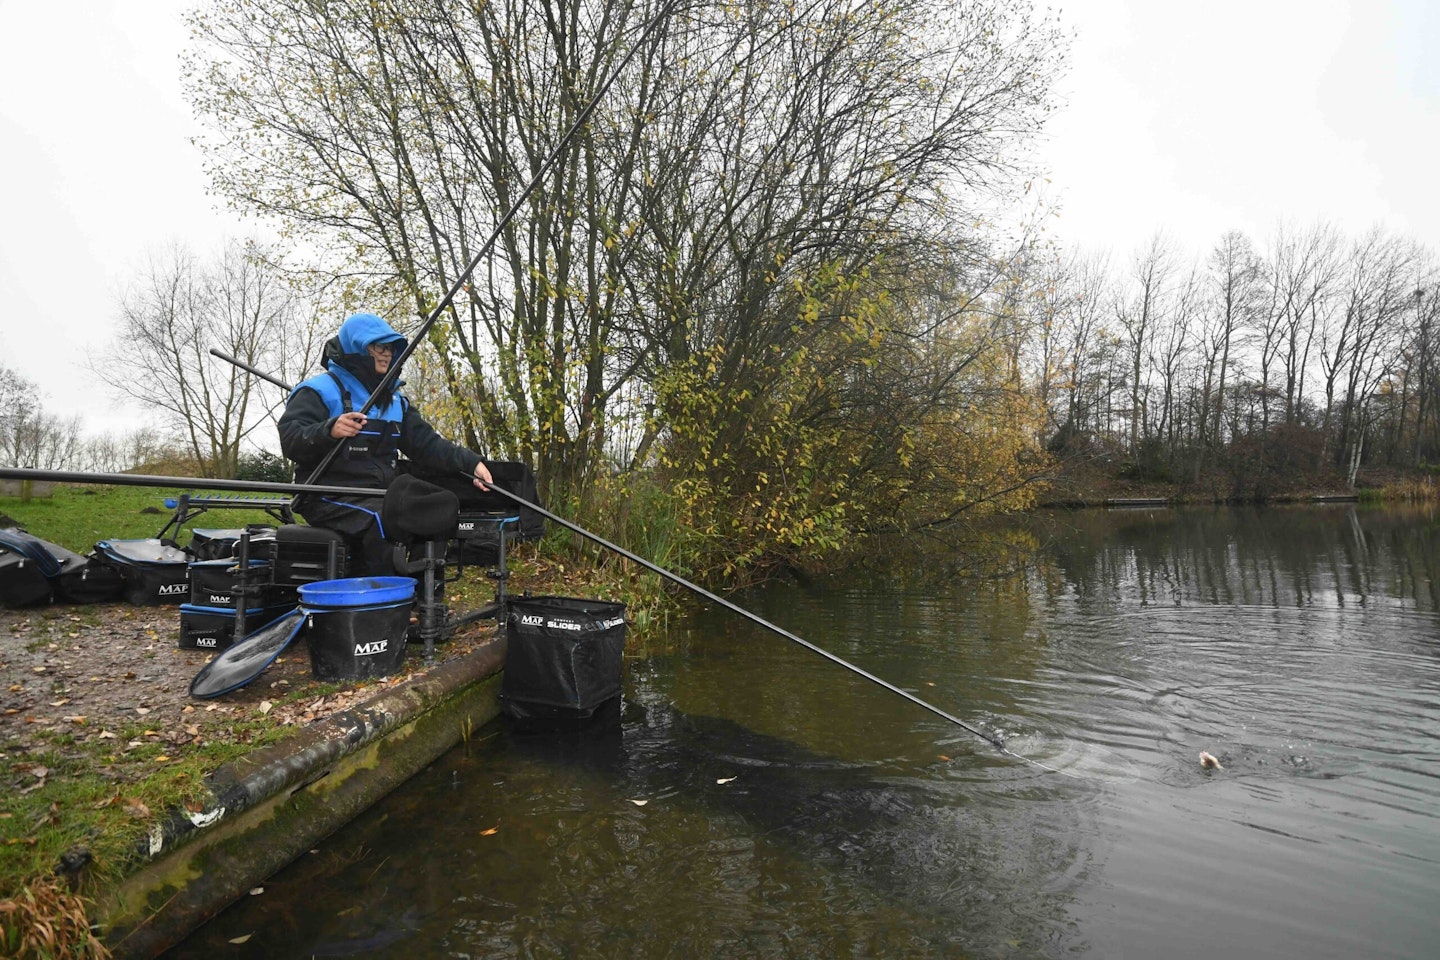 Bank End Fishery is accessible and full of fish!